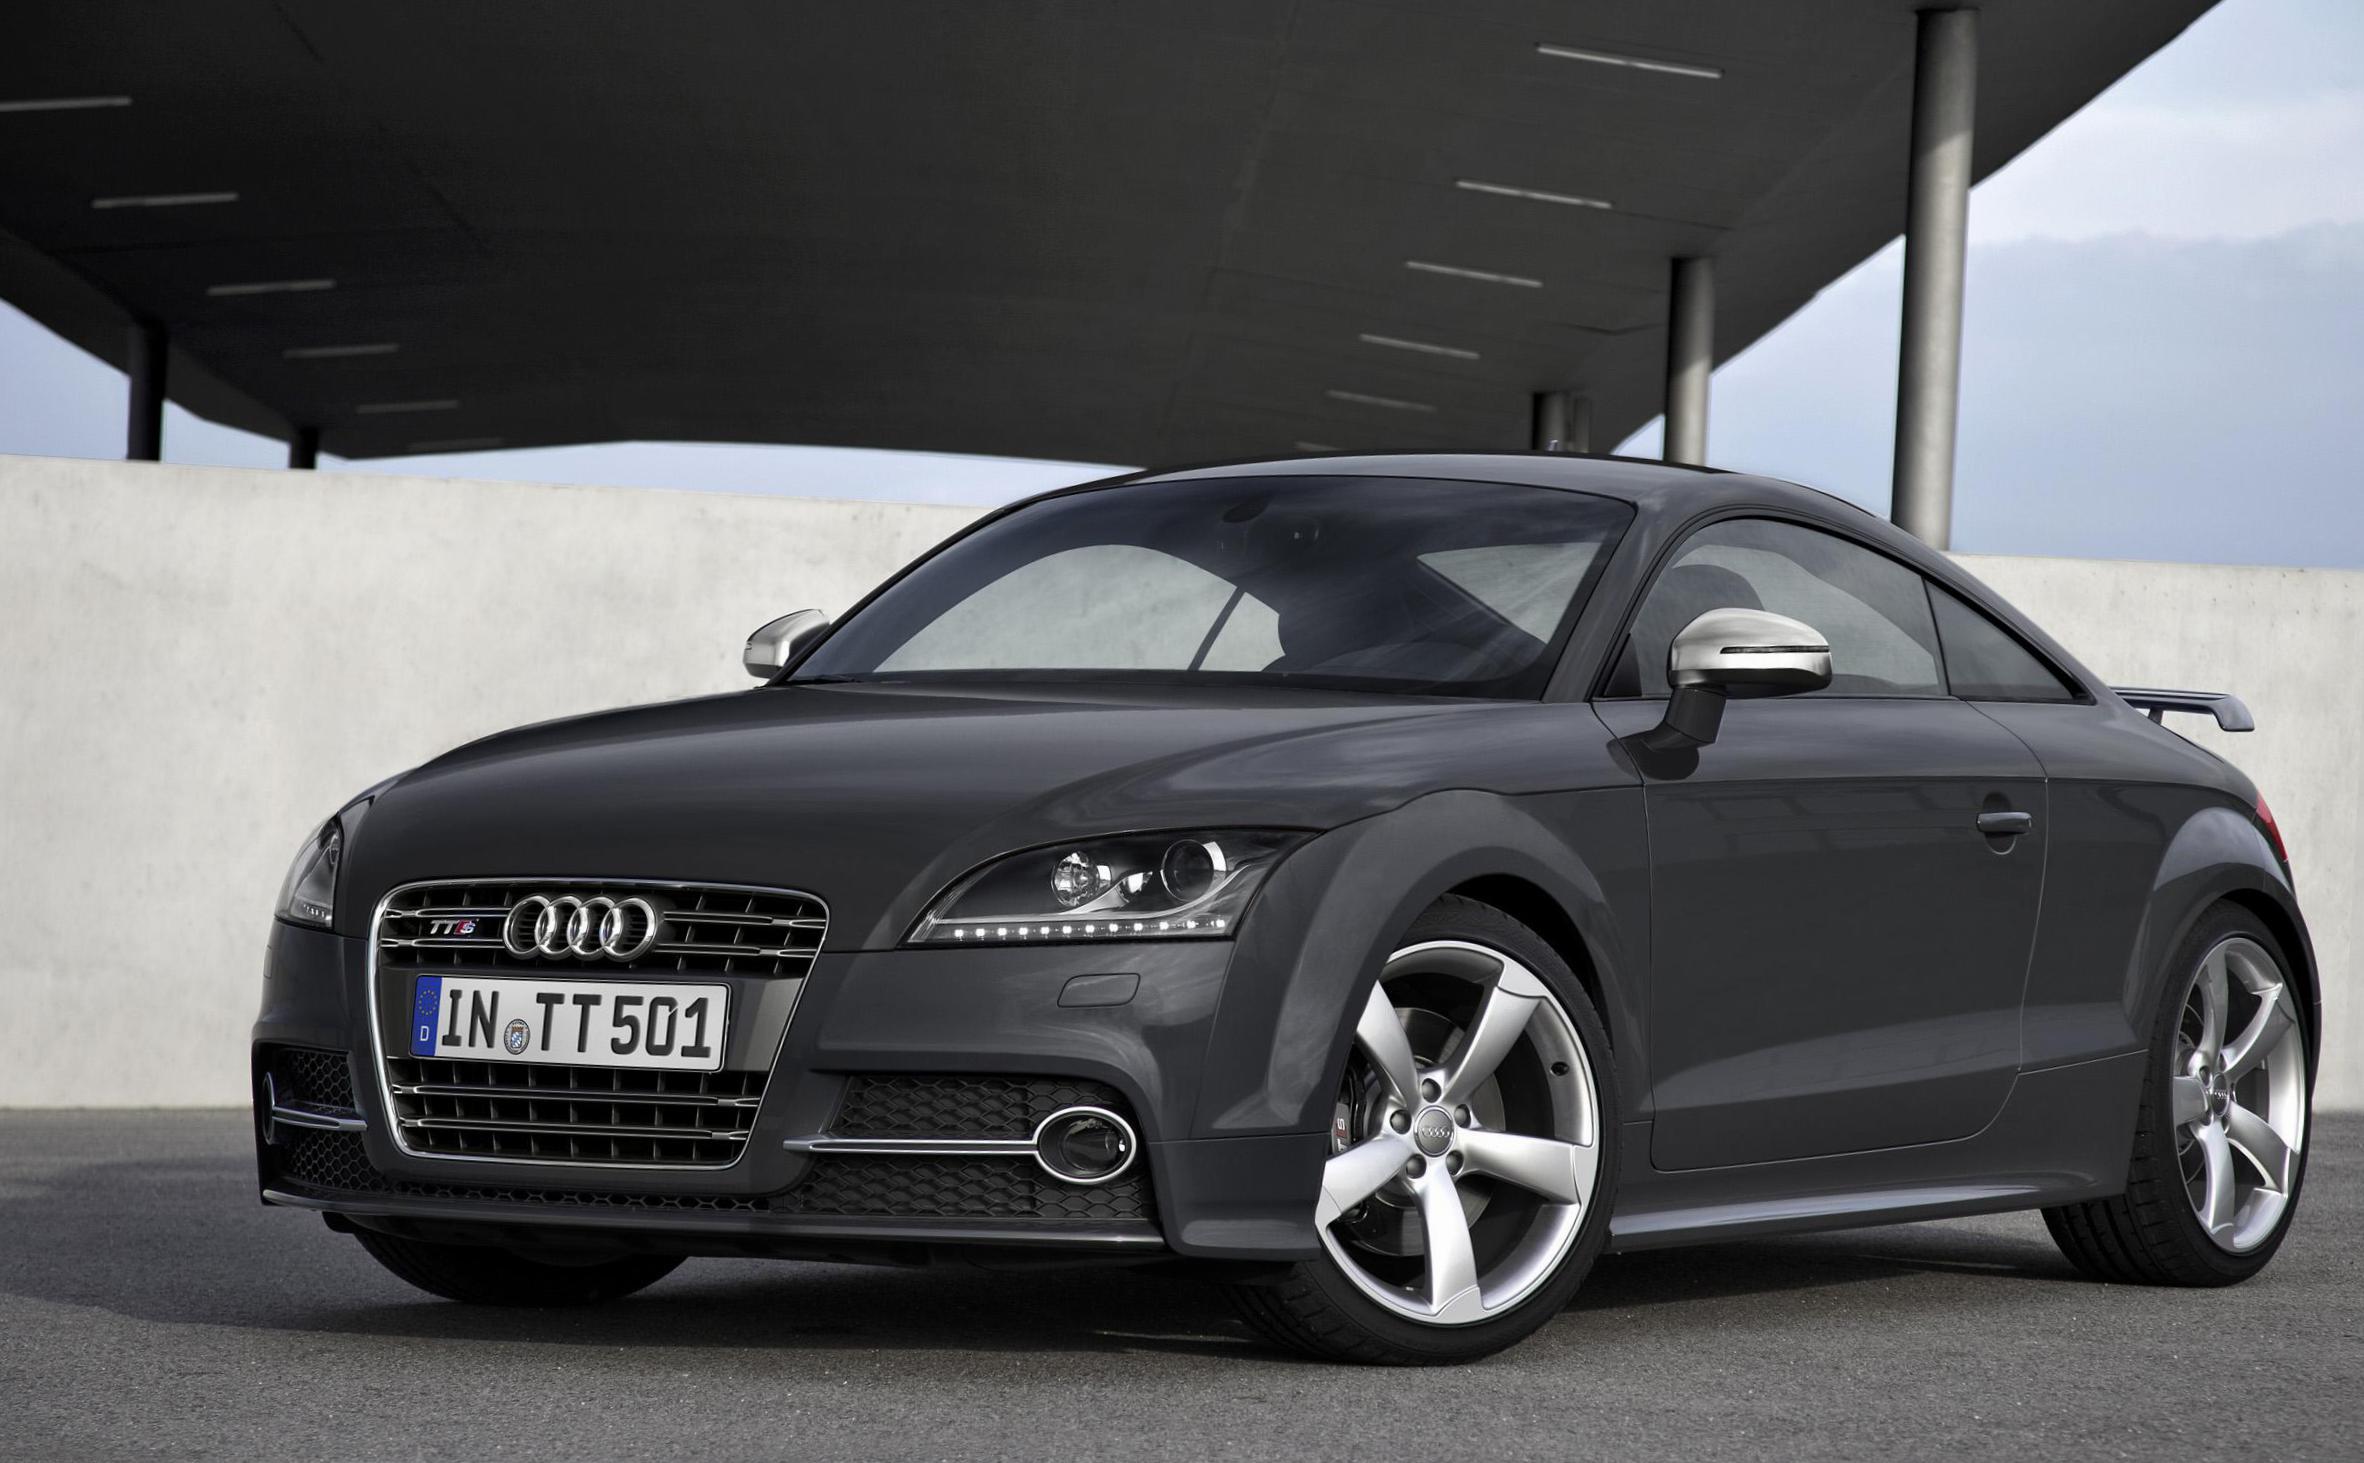 TTS Coupe Audi tuning 2013